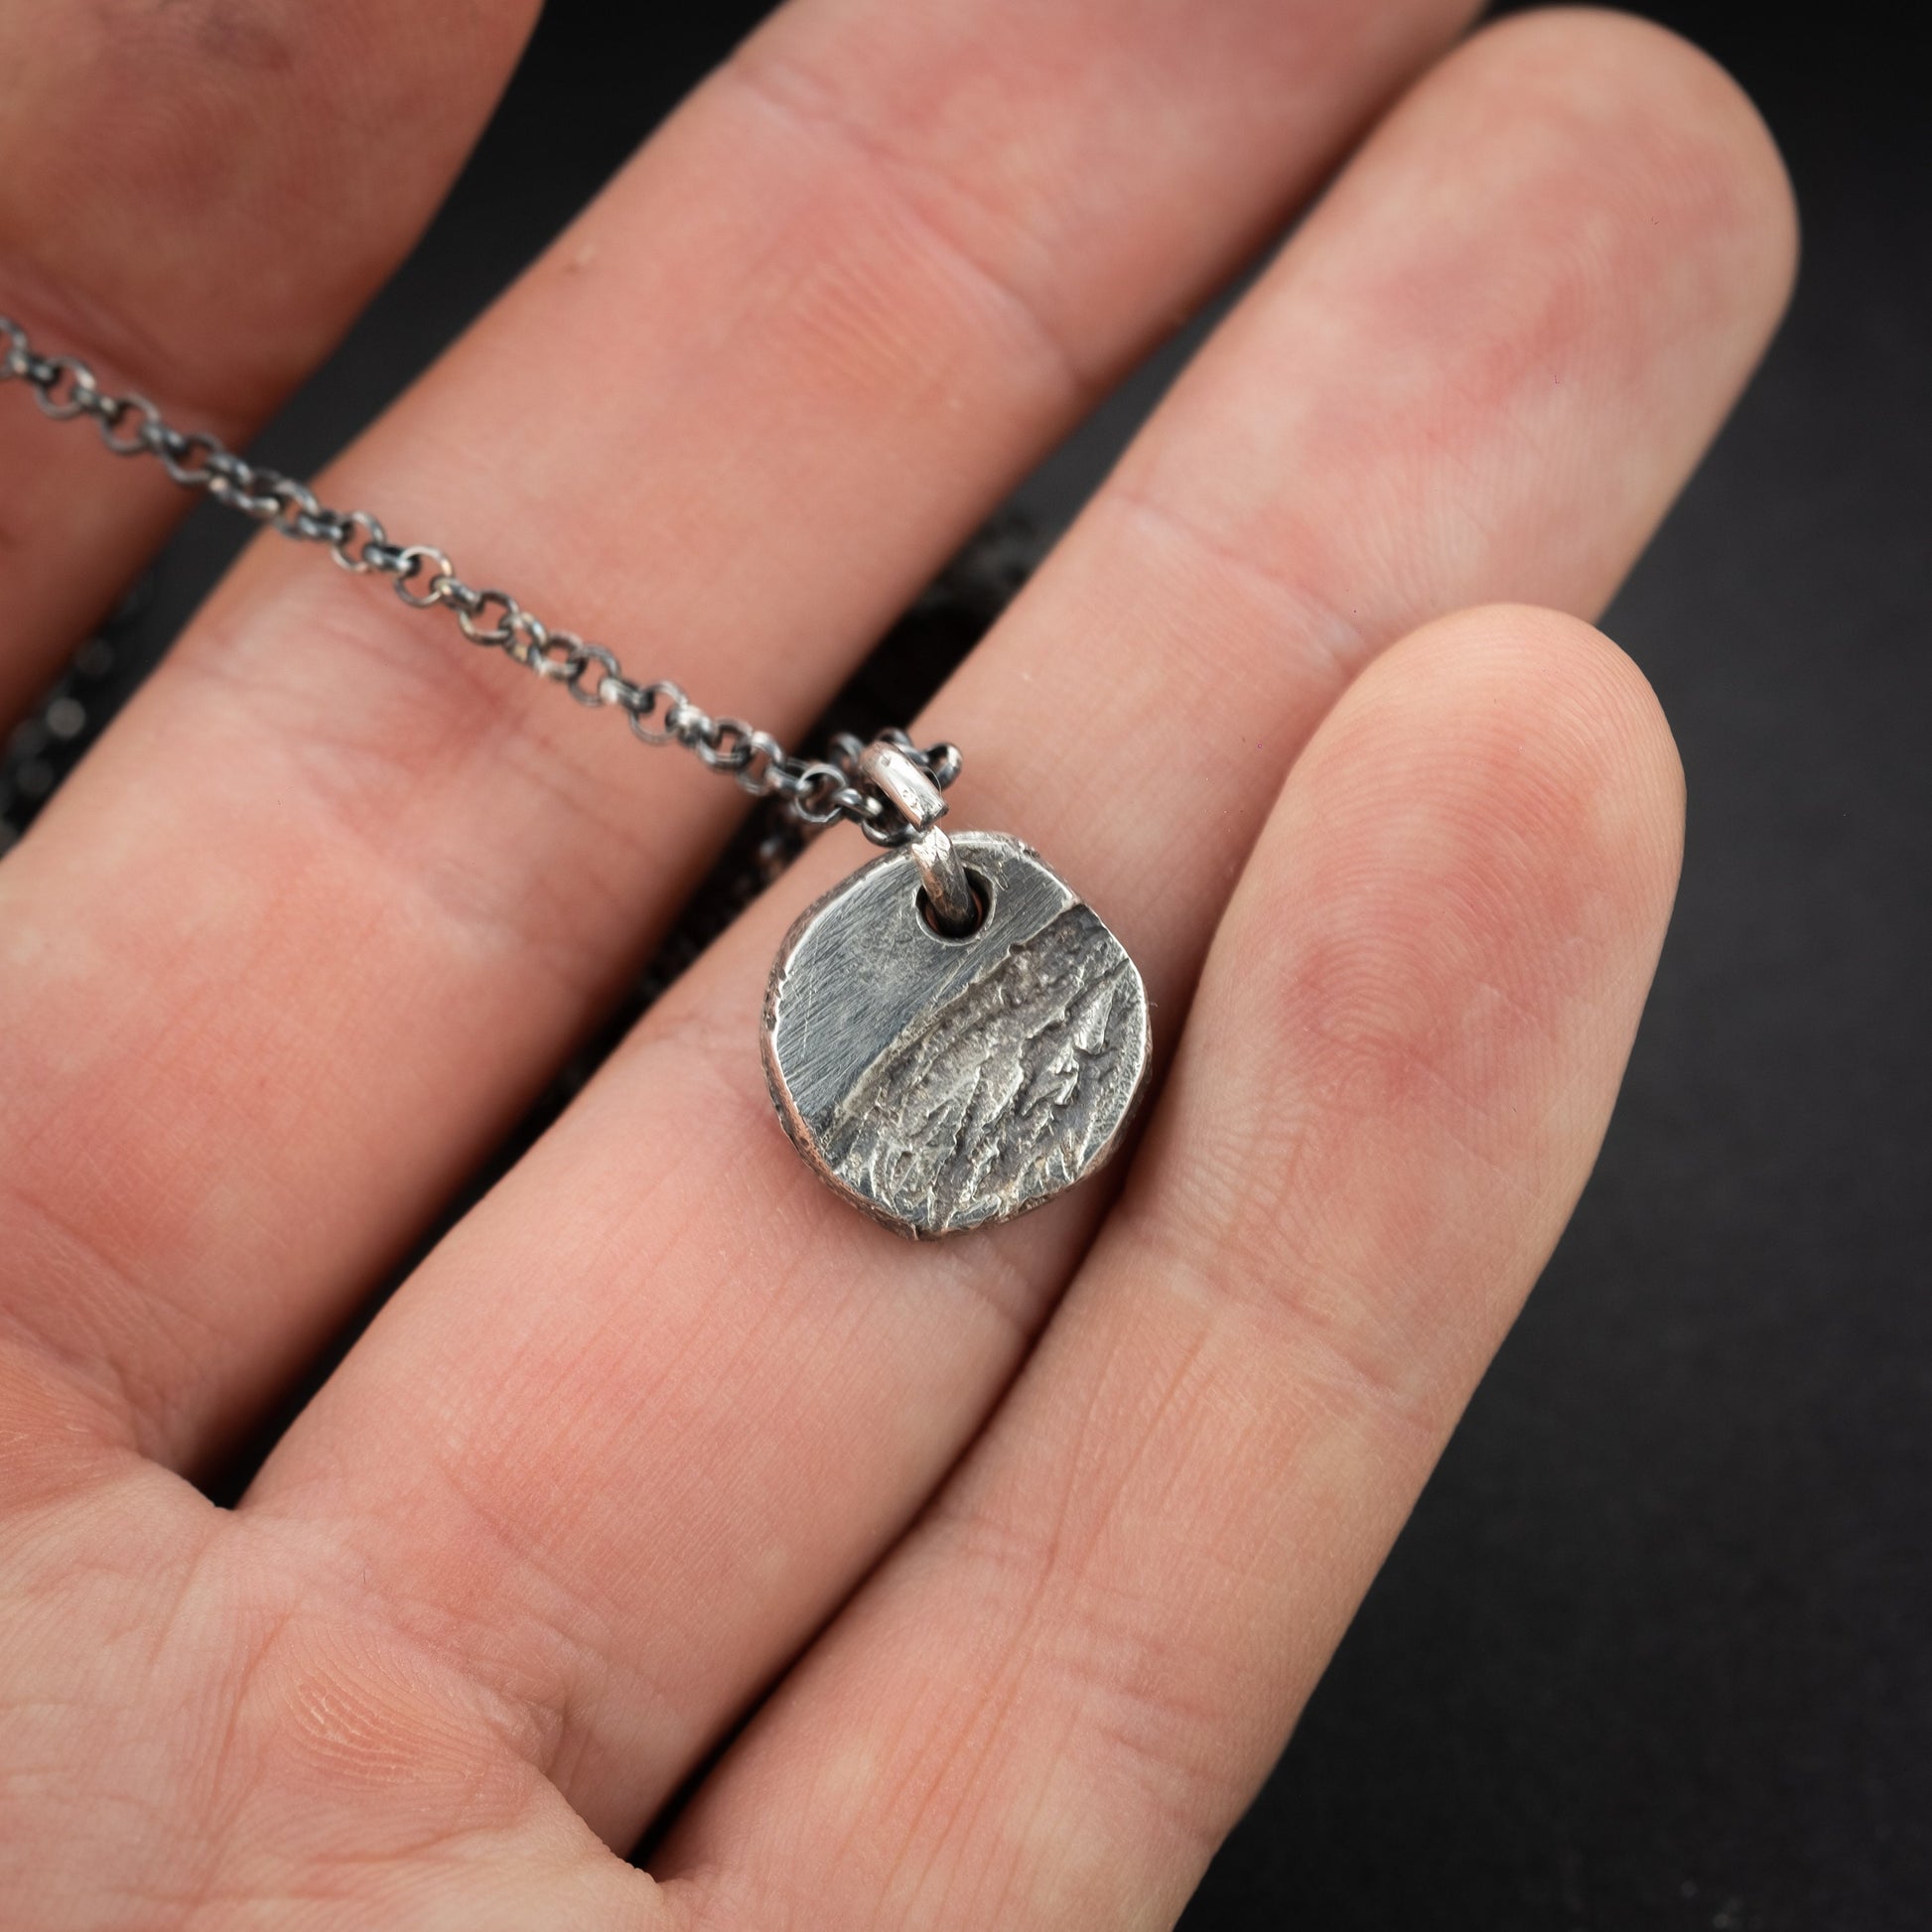 Silver Rustic Circle pendant necklace, Unique gifts for women, Husband gift, Mens Handmade jewelry, Boho necklace, Minimalist jewelry